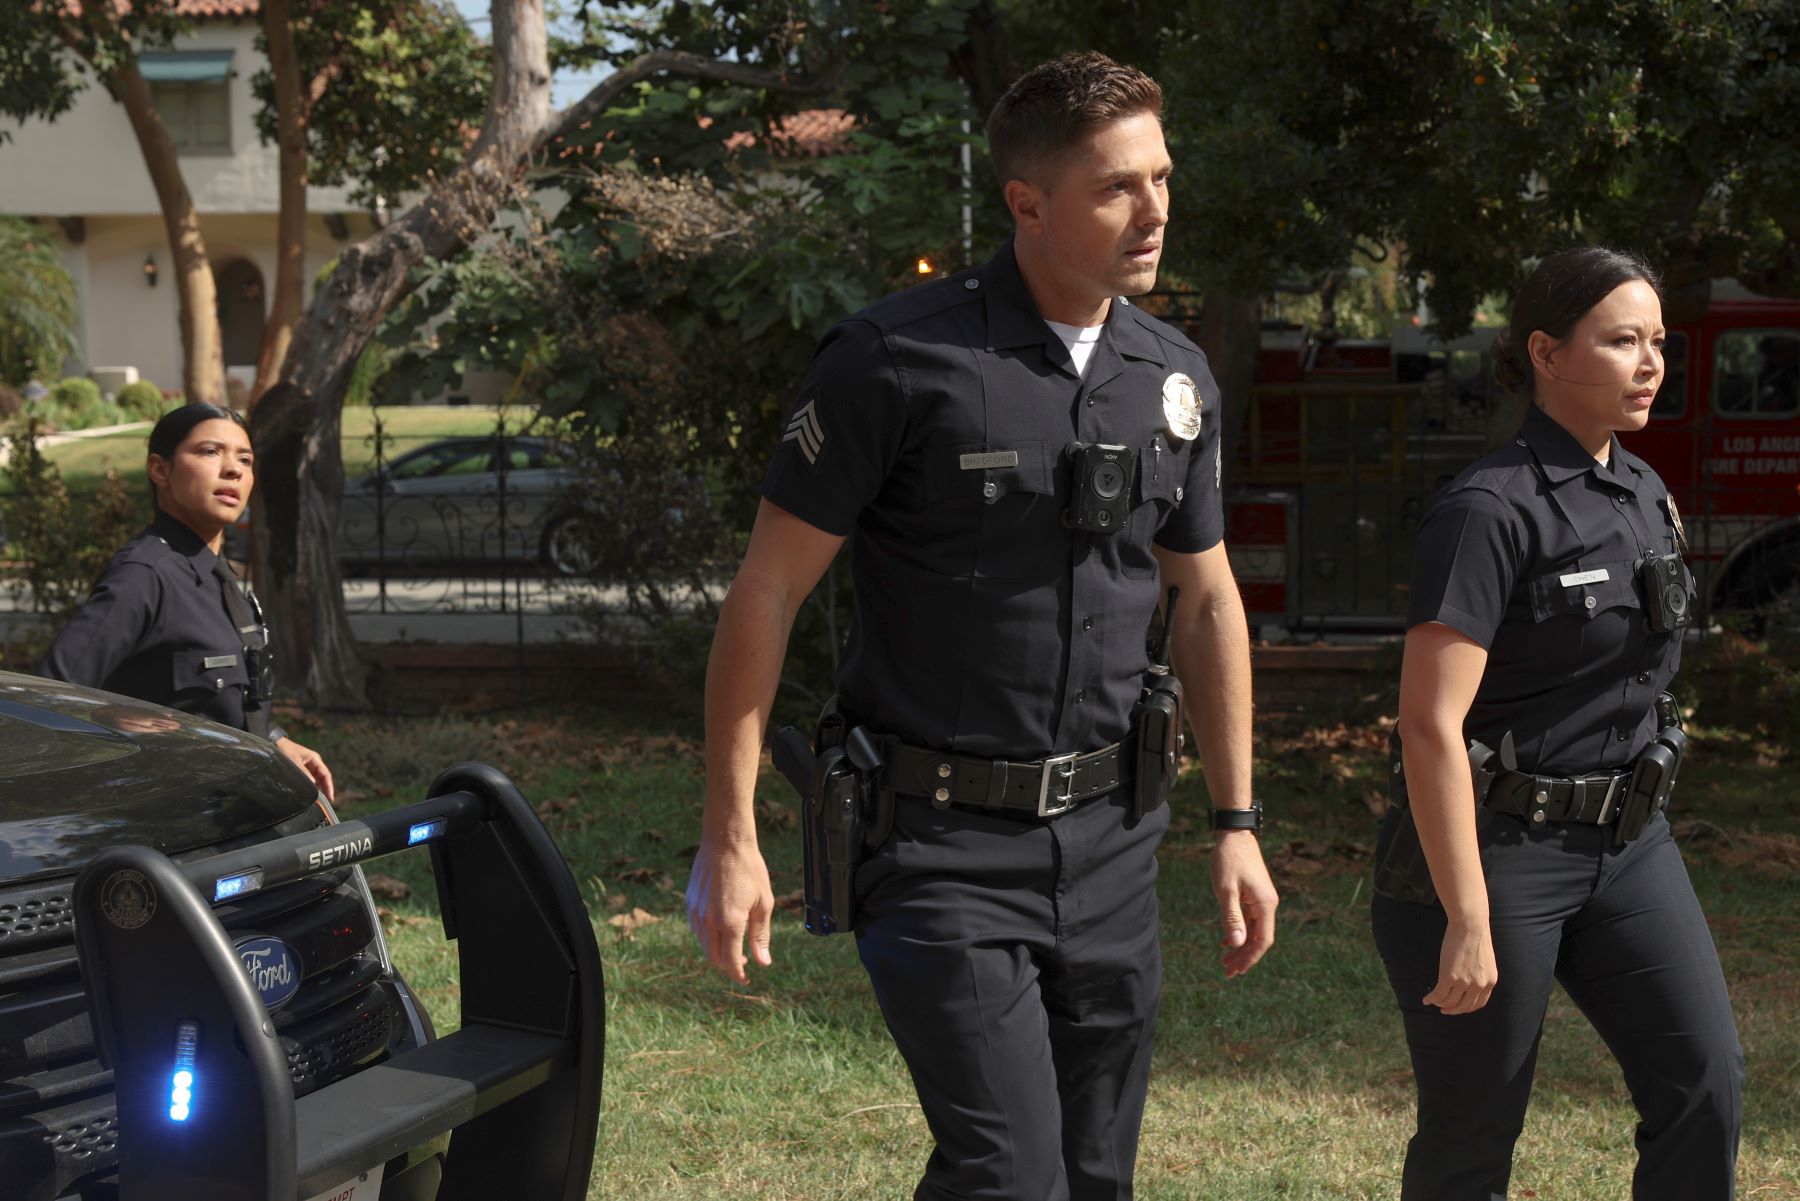 Lisseth Chavez as Celina, Eric Winter as Tim, and Melissa O'Neil as Lucy in 'The Rookie' Season 5 on ABC. They all wear their police uniforms.